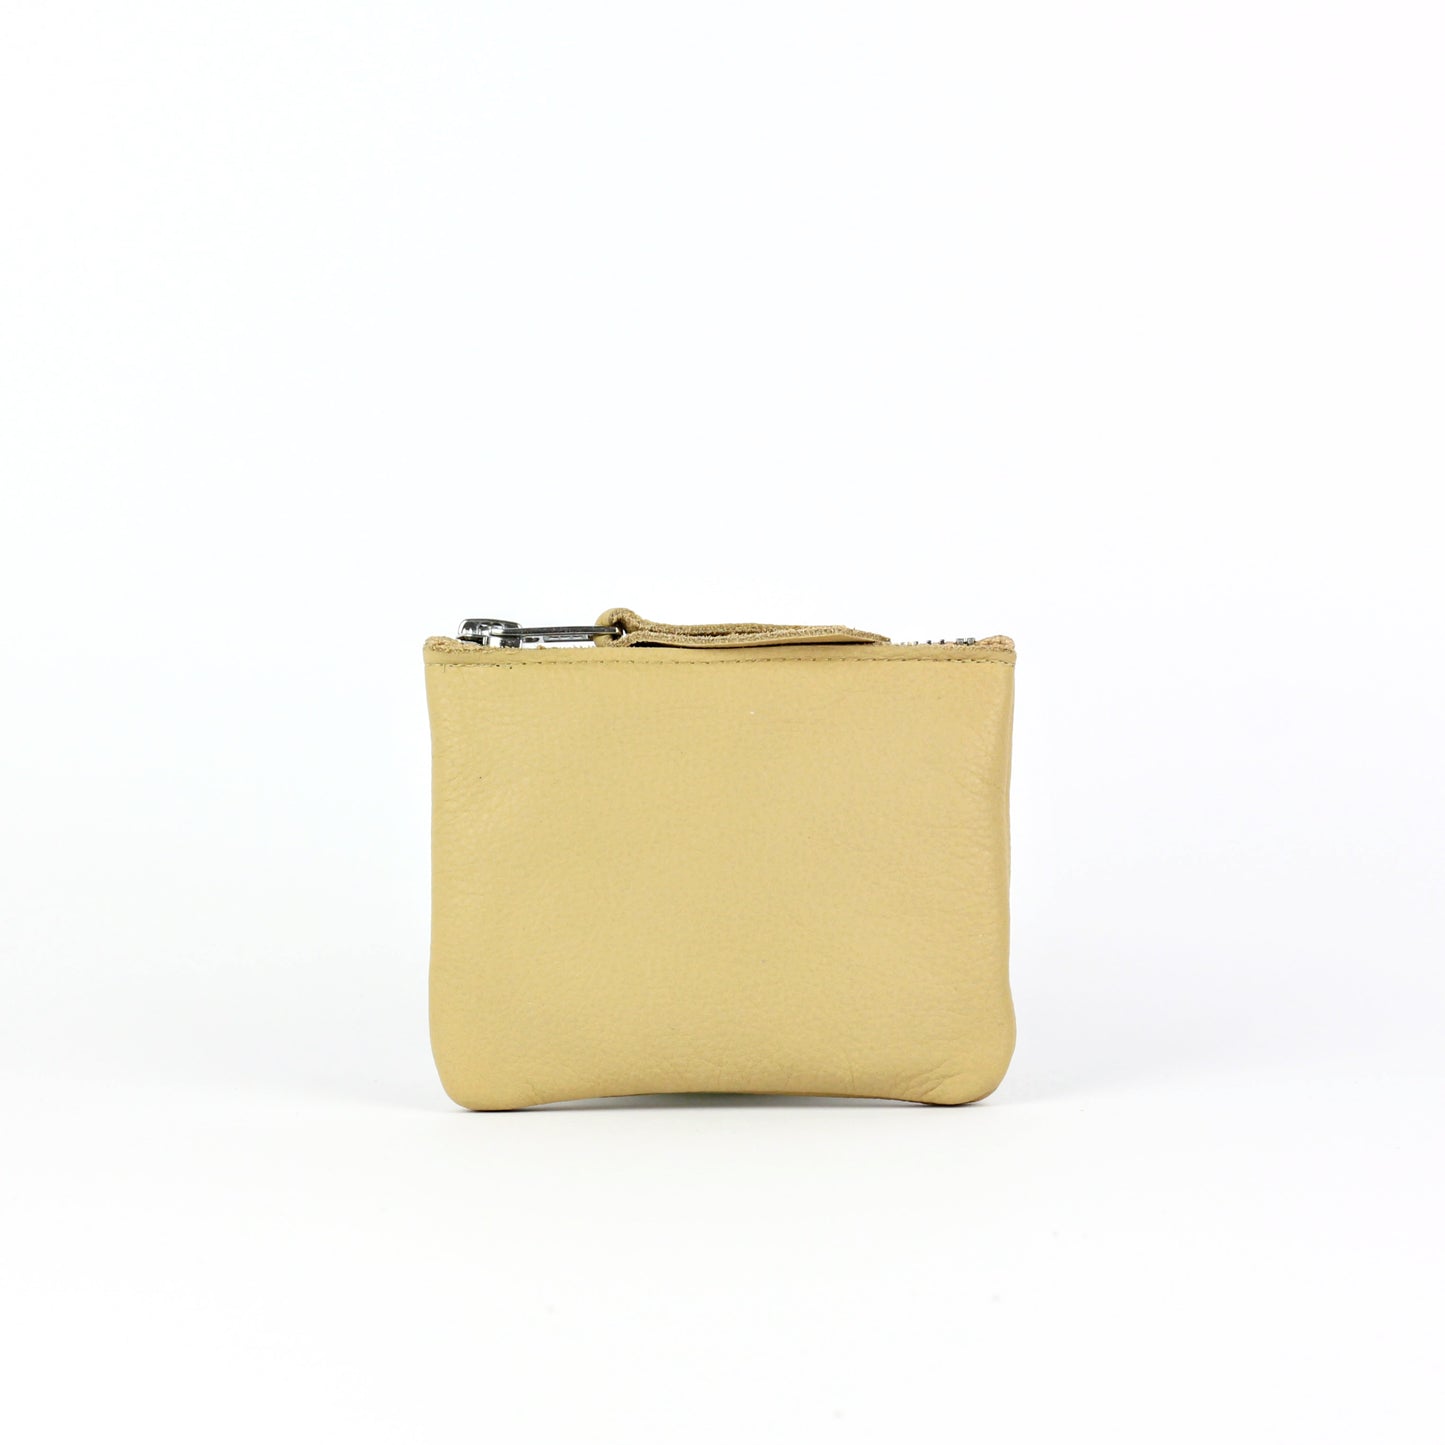 Beige Leather Coin Purse